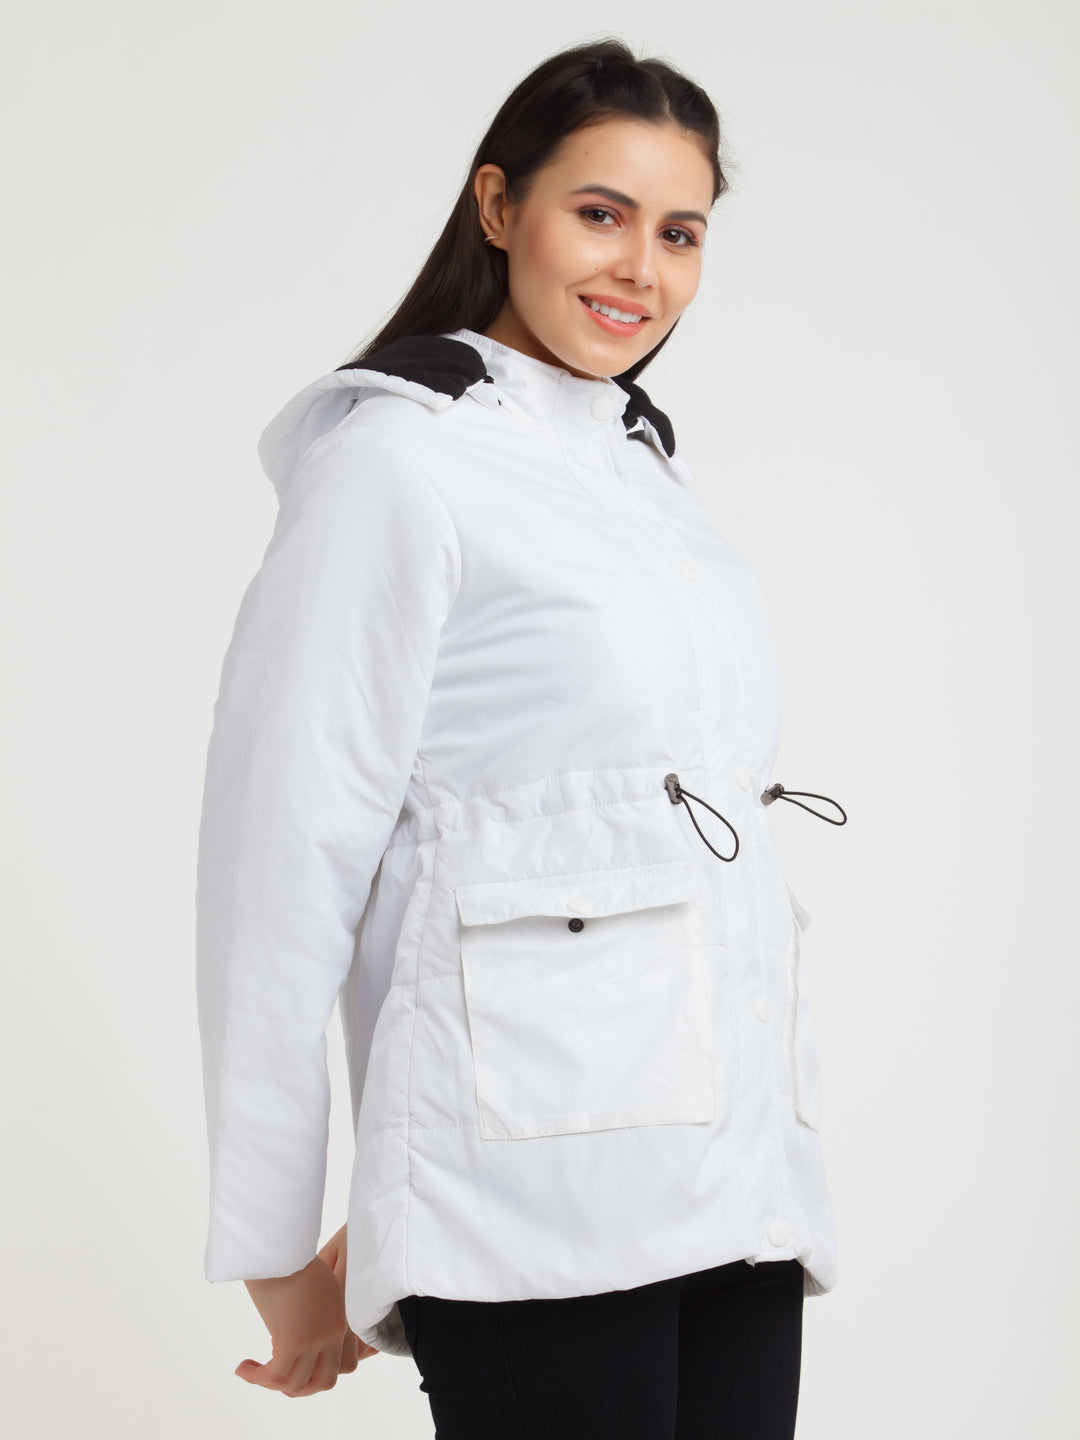 White Solid Jacket For Women